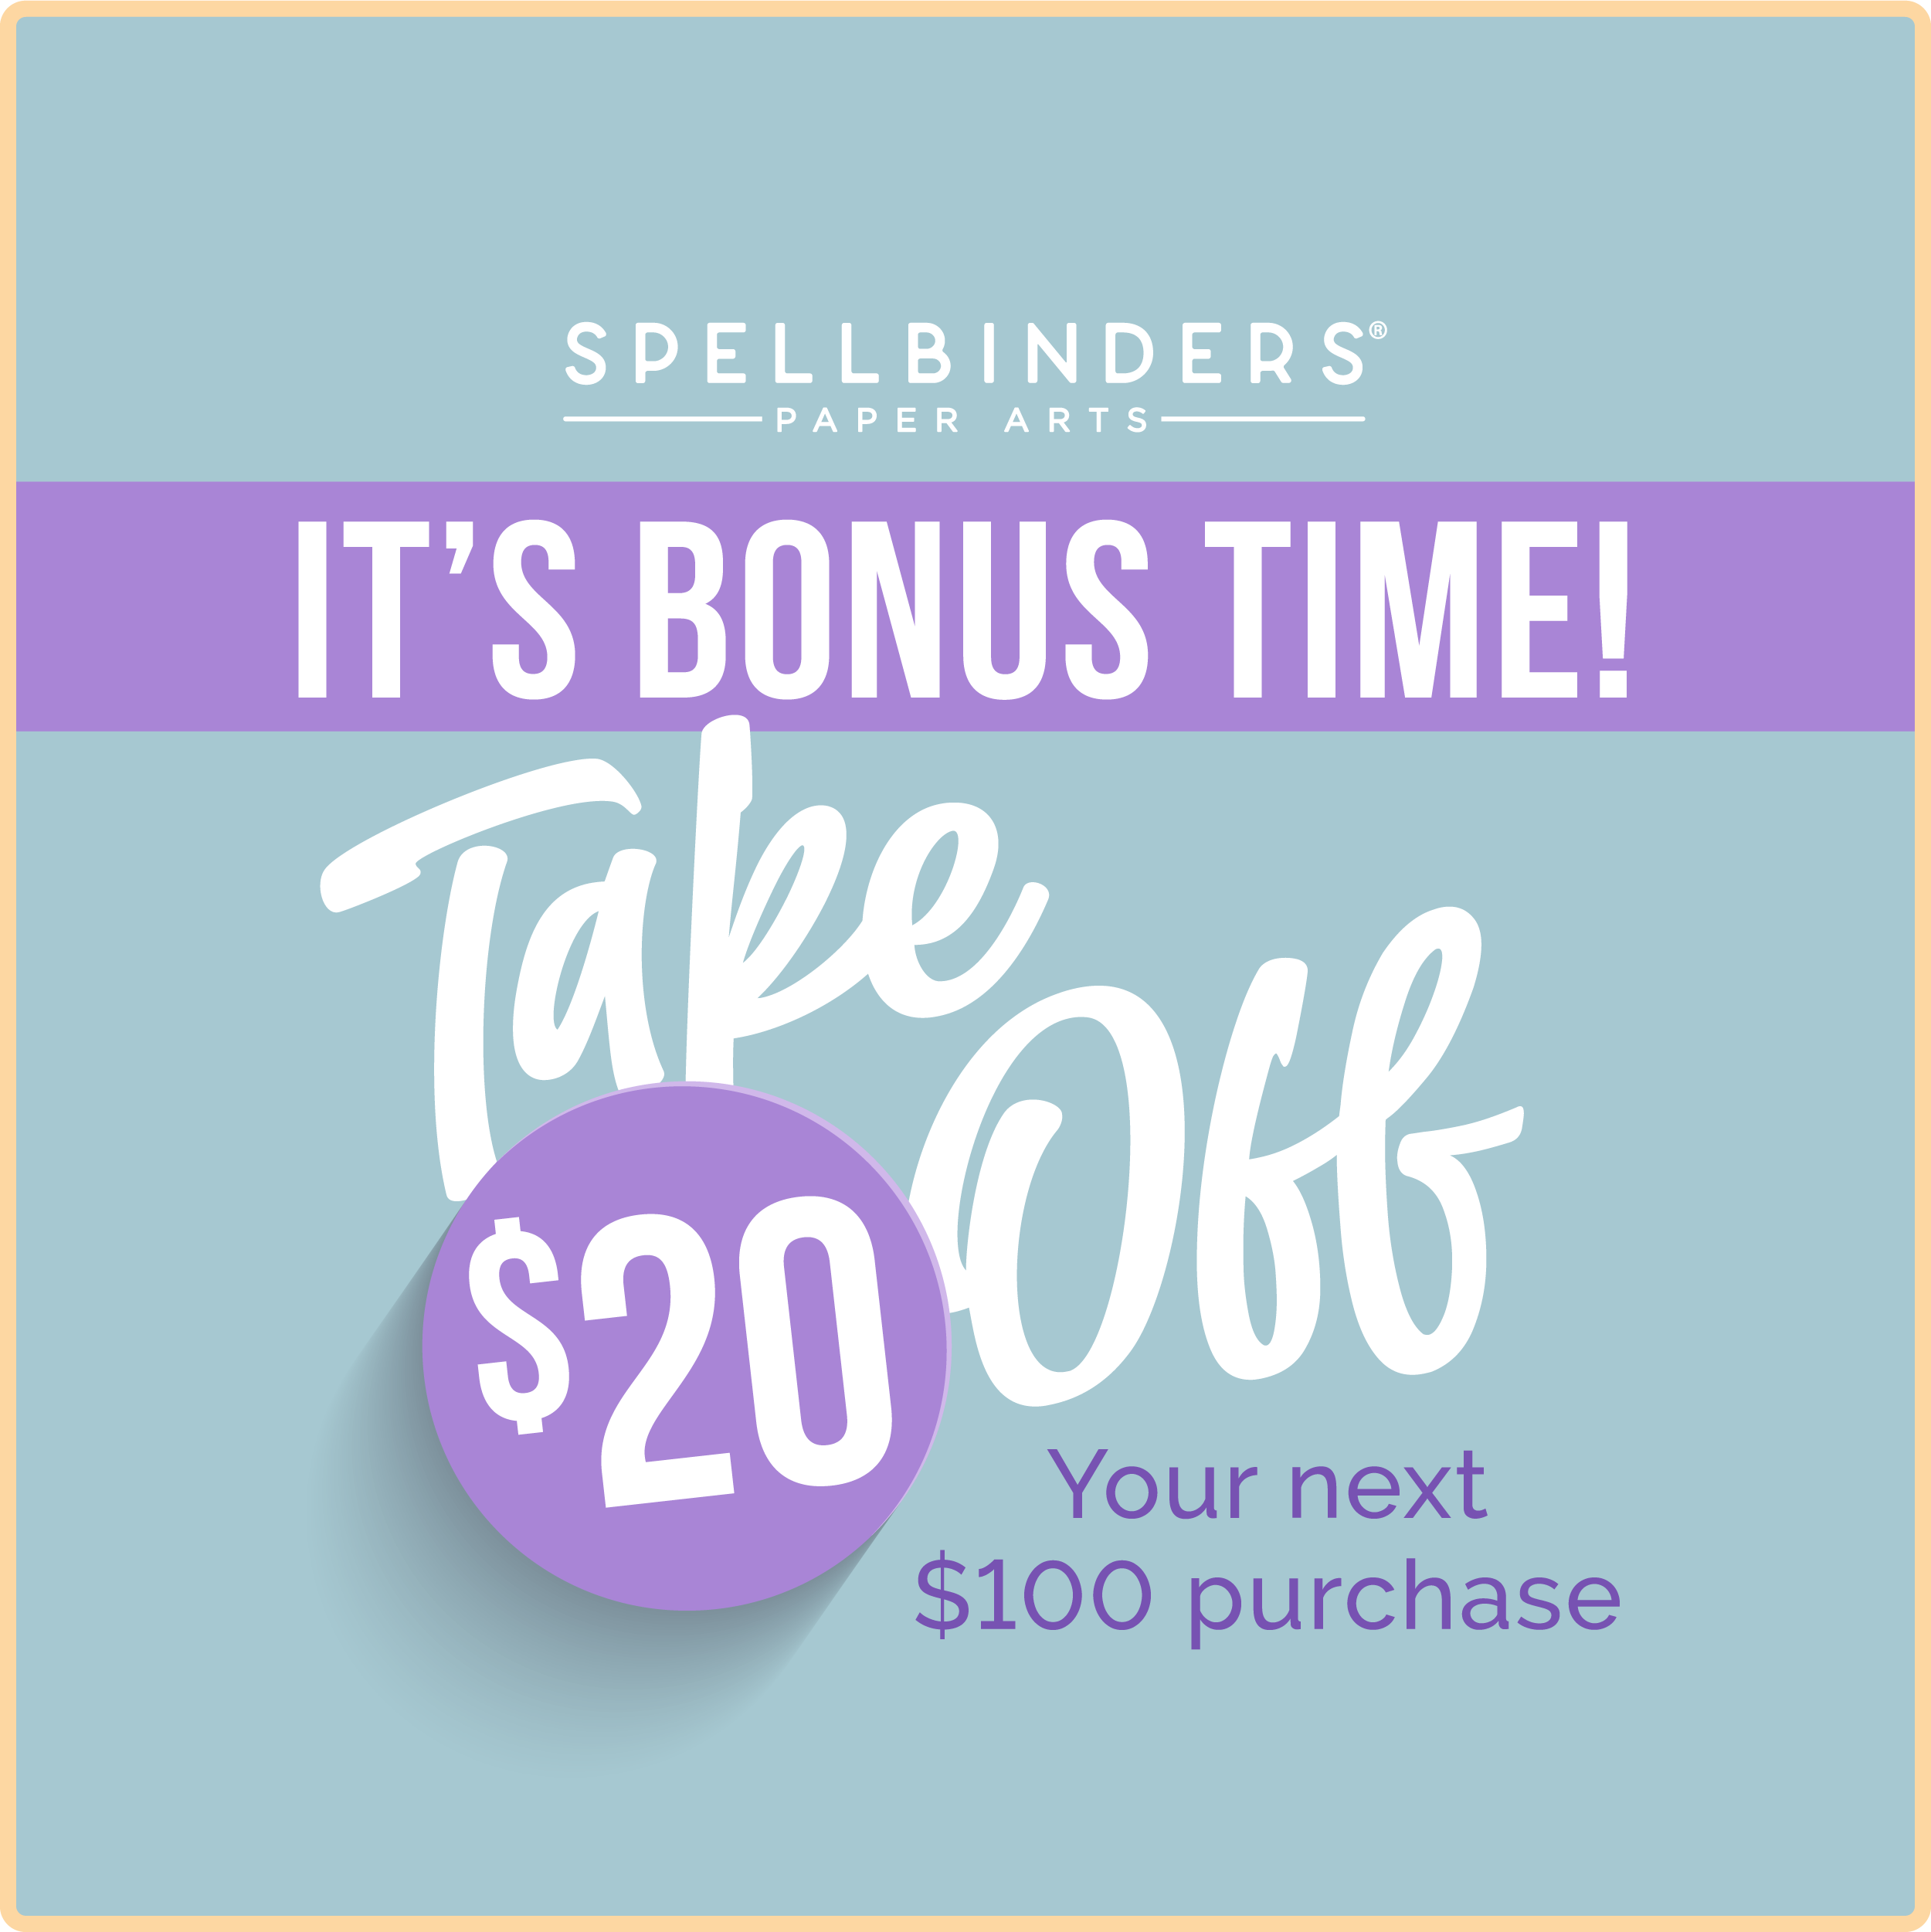 Spellbinders AUG 2022 Take $20 off of $100 purchase